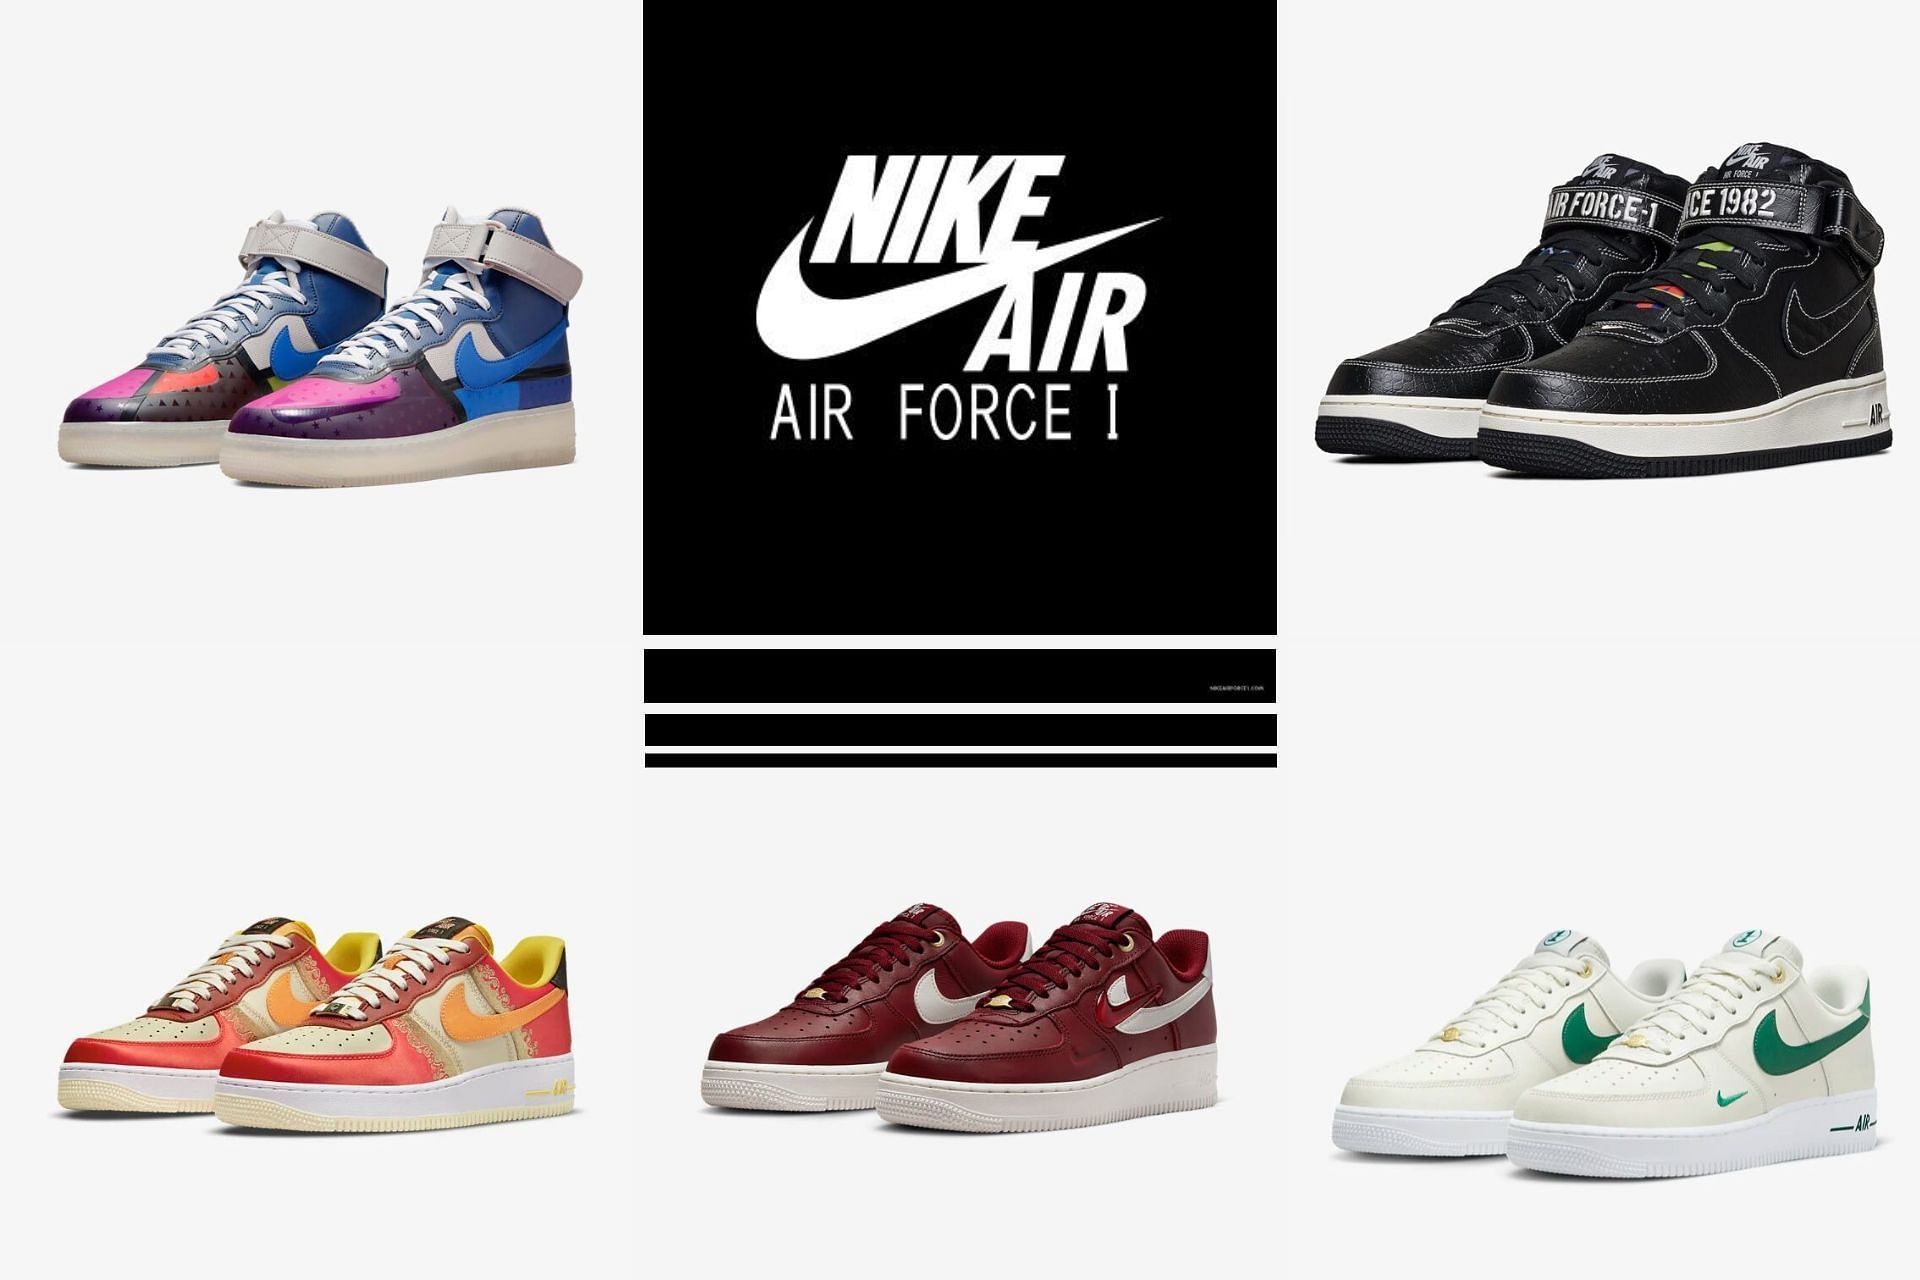 Nike: 5 best Air Force 1 colorways released for 40th anniversary celebrations of the sneaker model